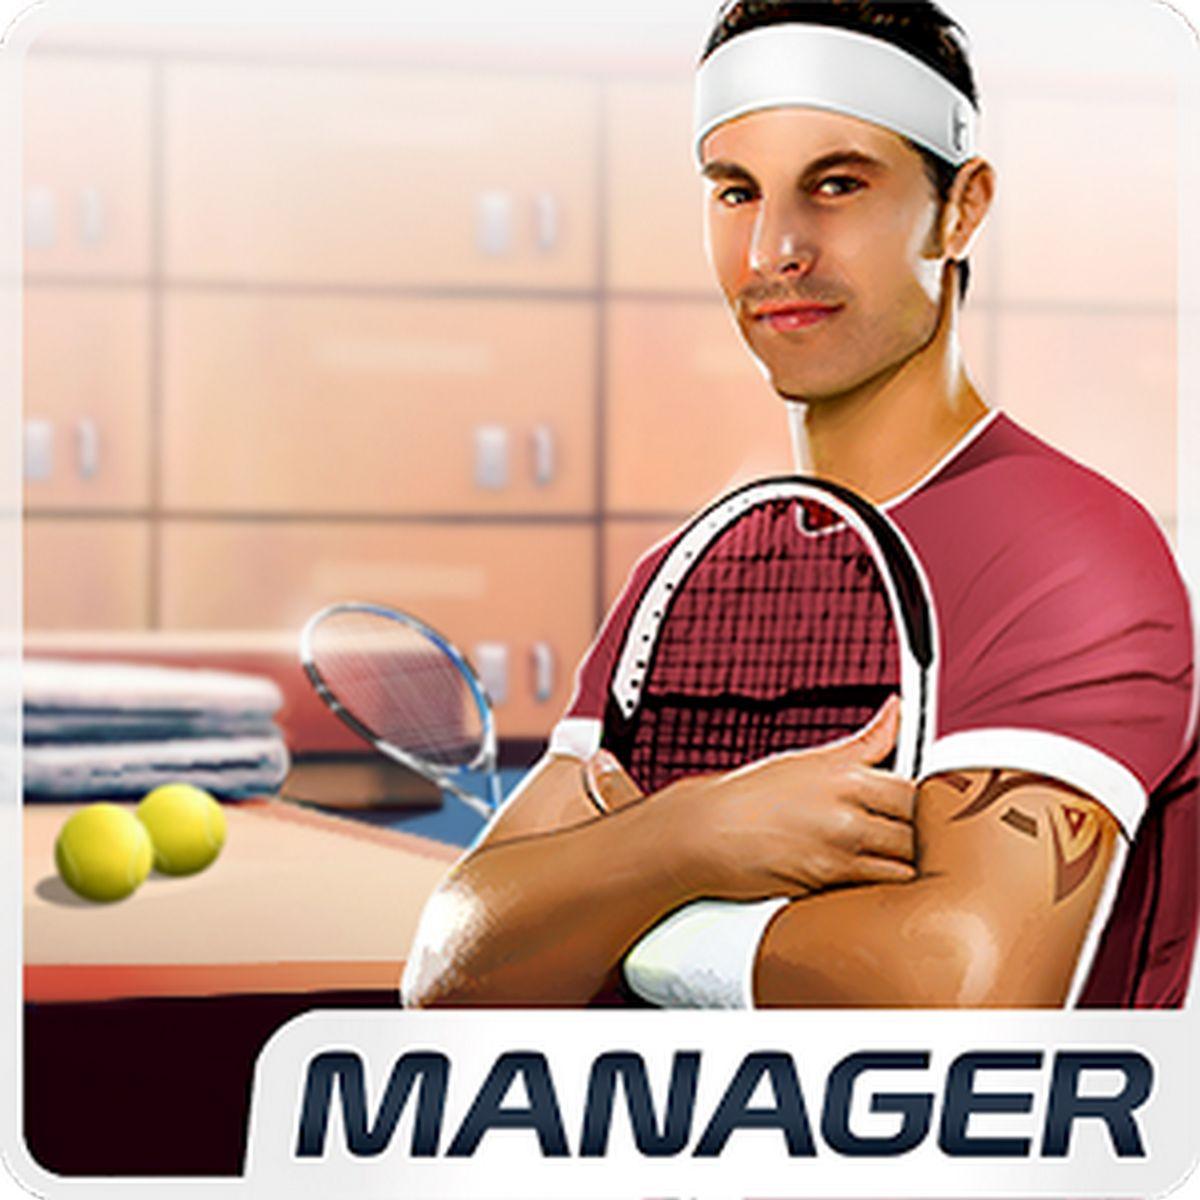 TOP SEED Tennis Manager 2020 APK MOD v2.47.1 (Dinero infinito)